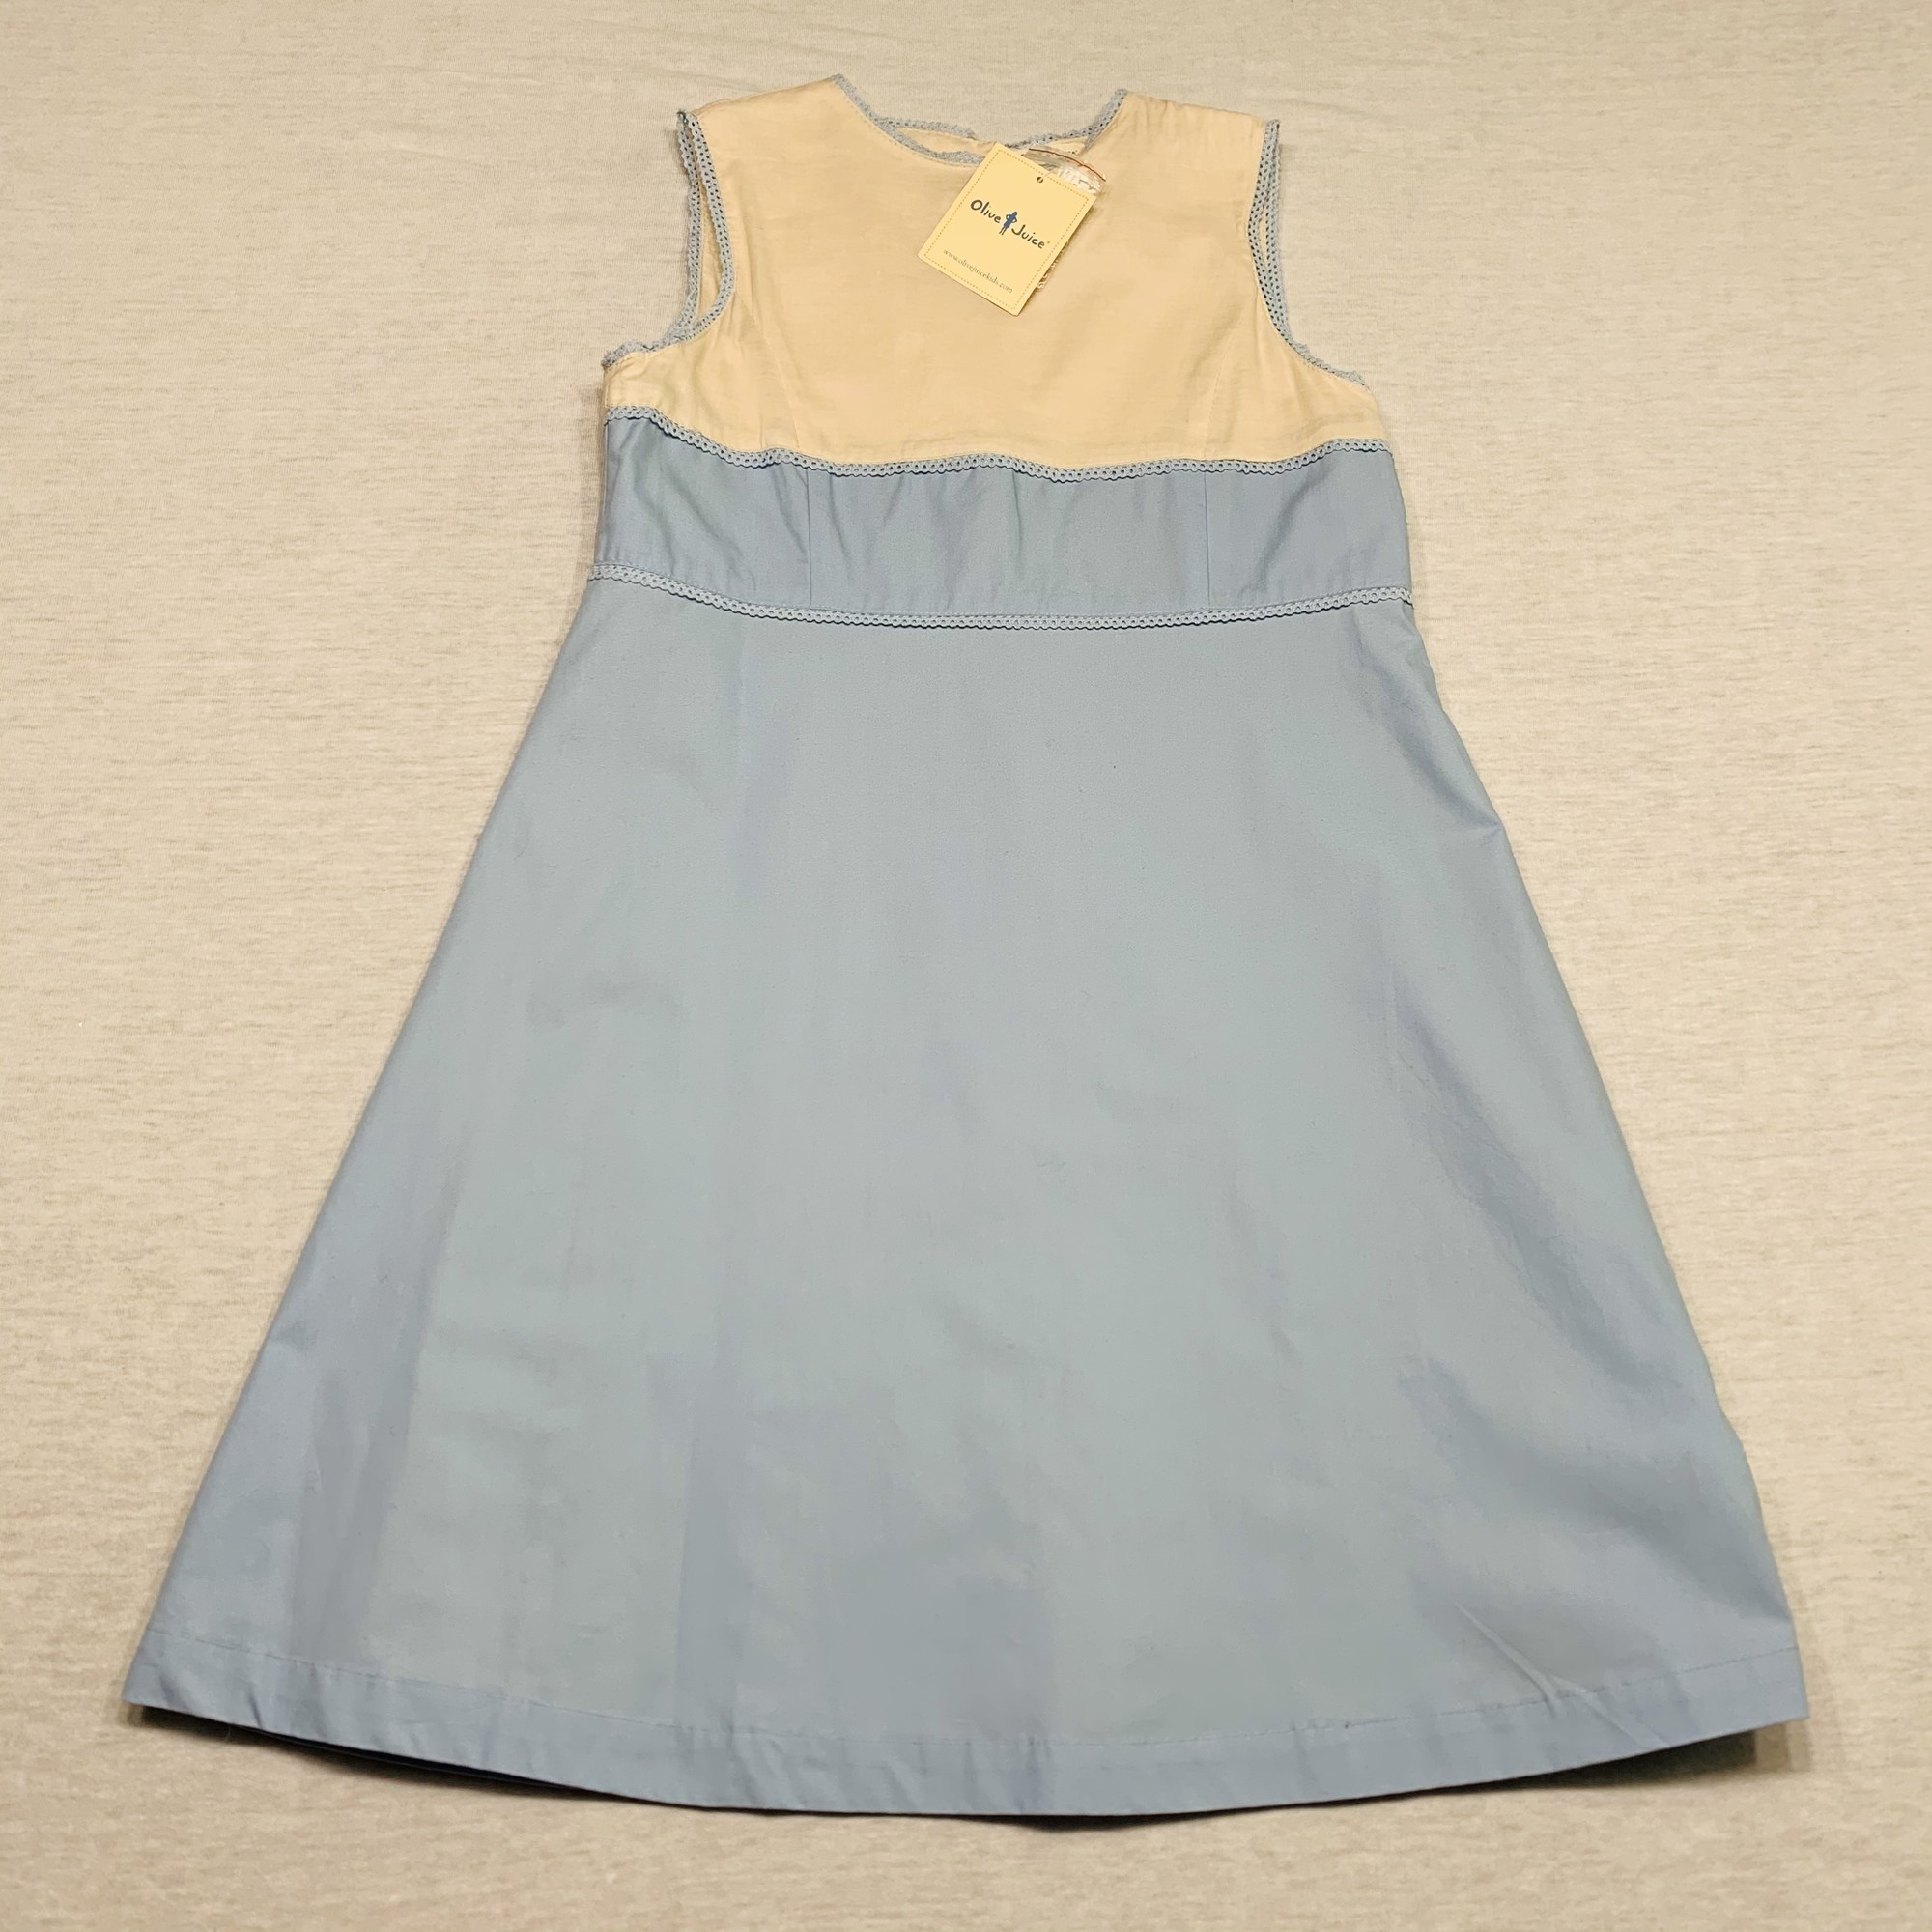 NWT dress with lace trim & full lining